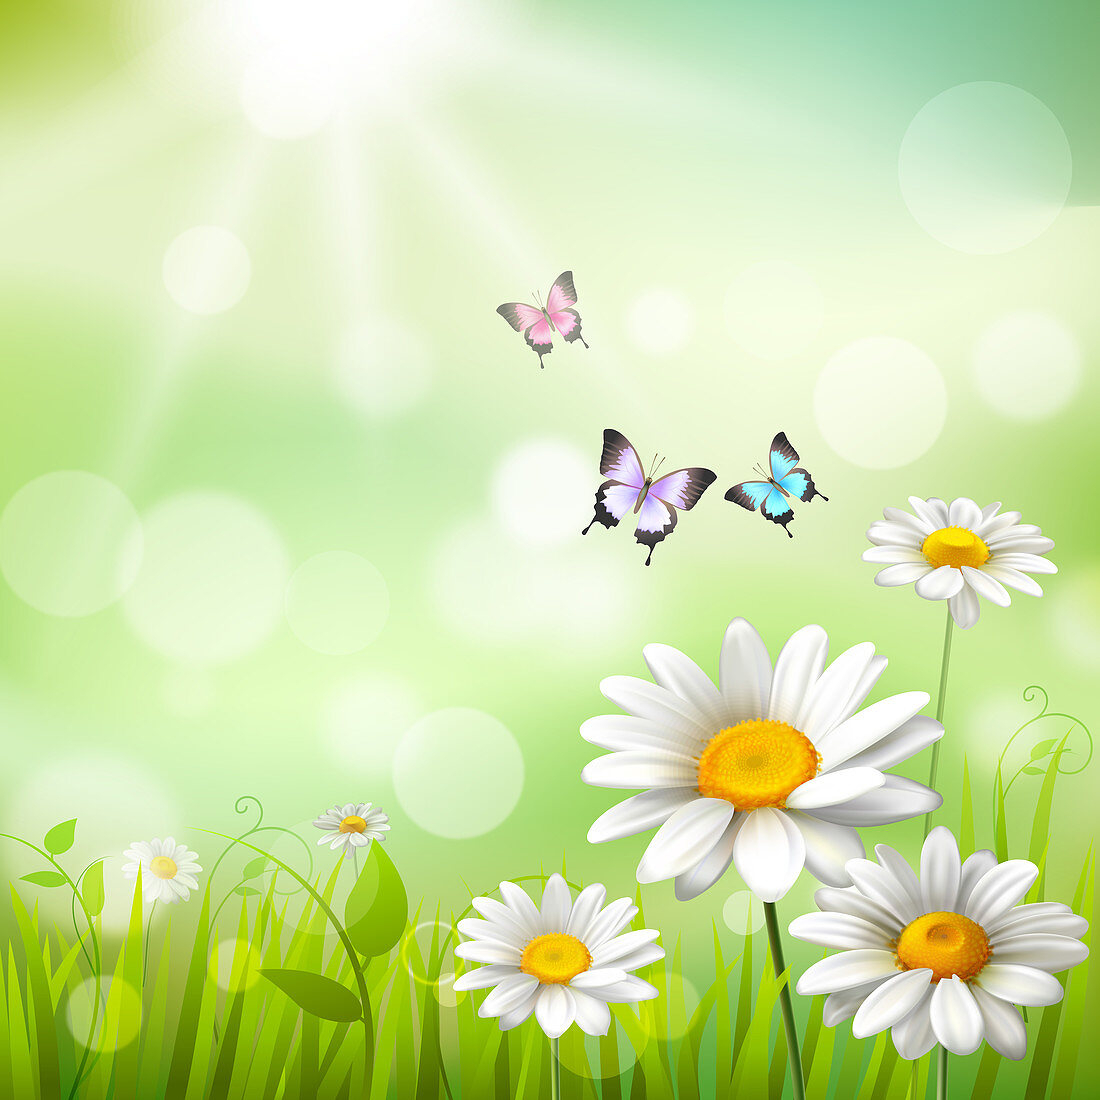 Daisies and butterflies, illustration